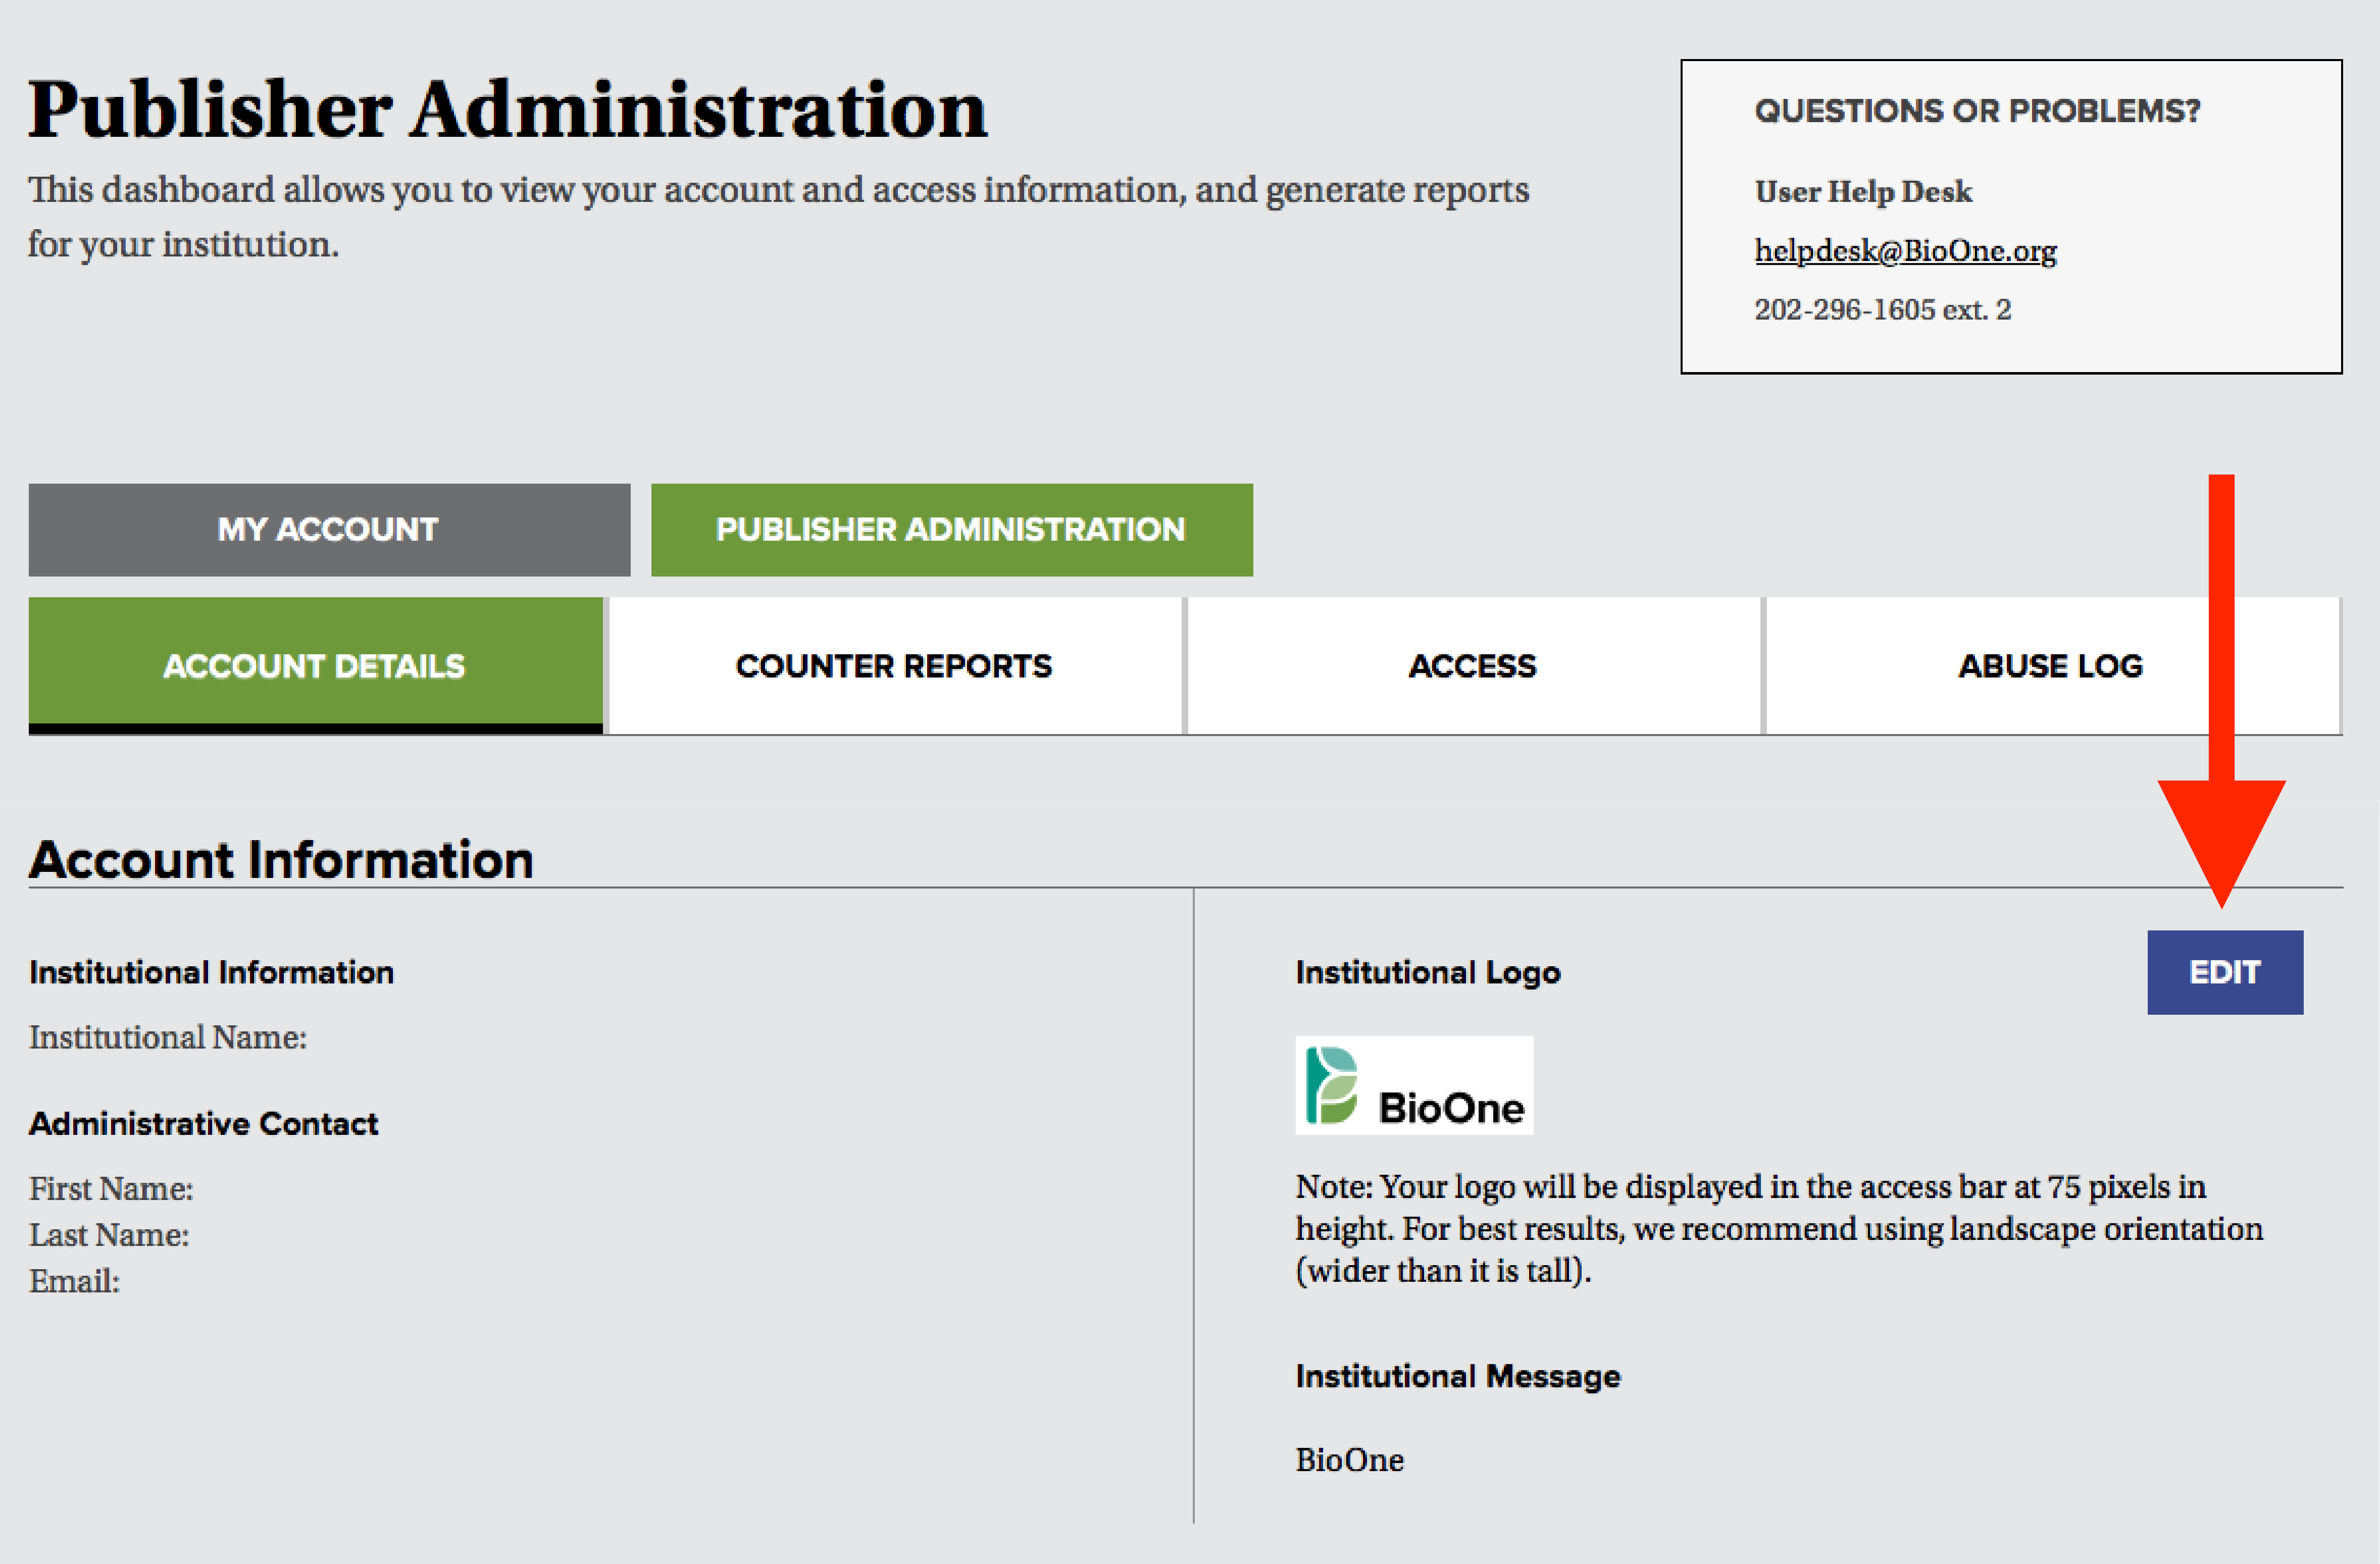 A screenshot of the Account Details tab in the Publisher Administration dashboard, with a red arrow pointing to the "Edit" button in the "Institutional Logo" section.